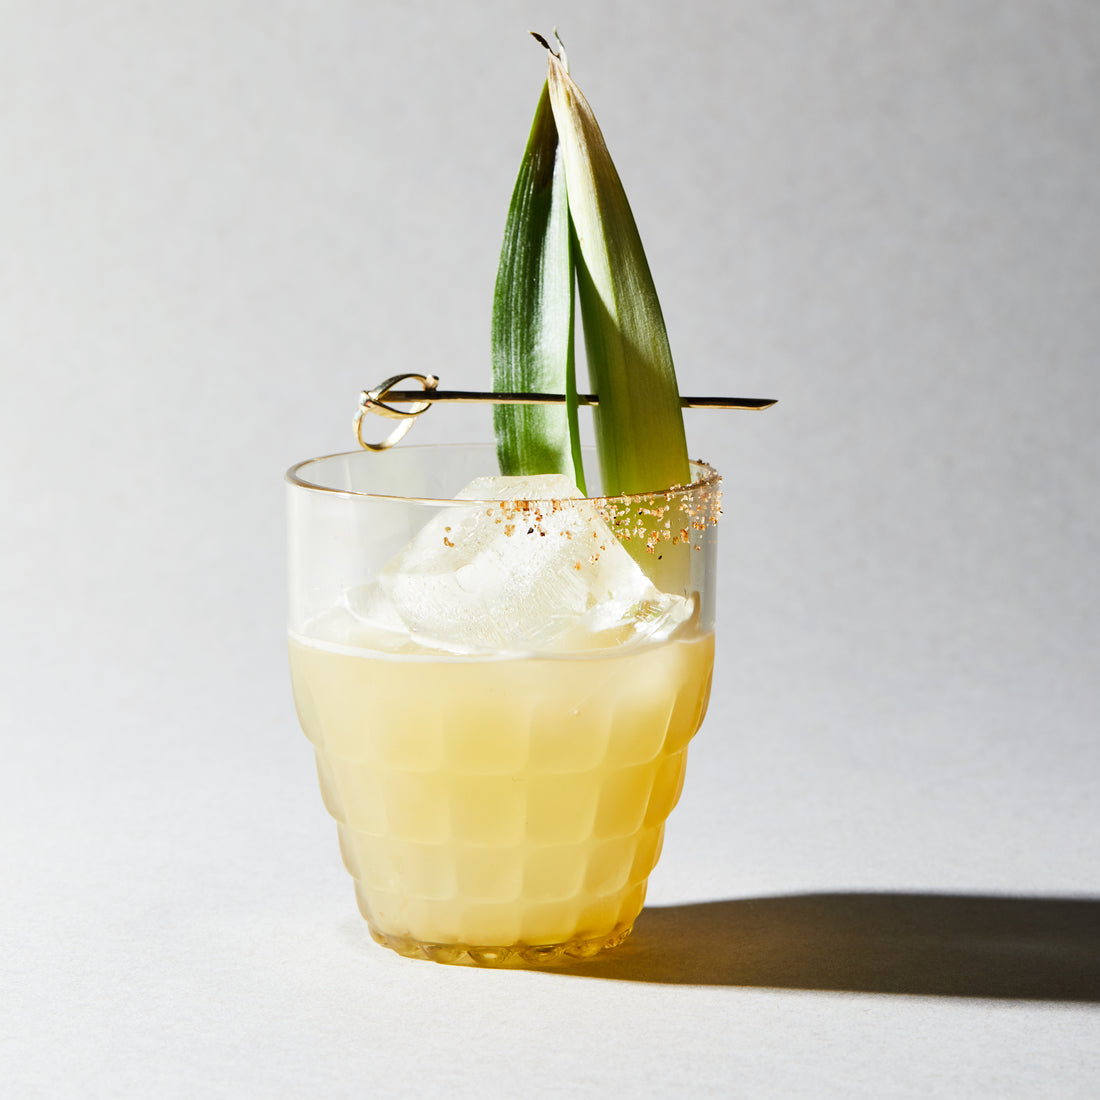 Pineapple Lime Cocktail Mixer - The Tamale Company